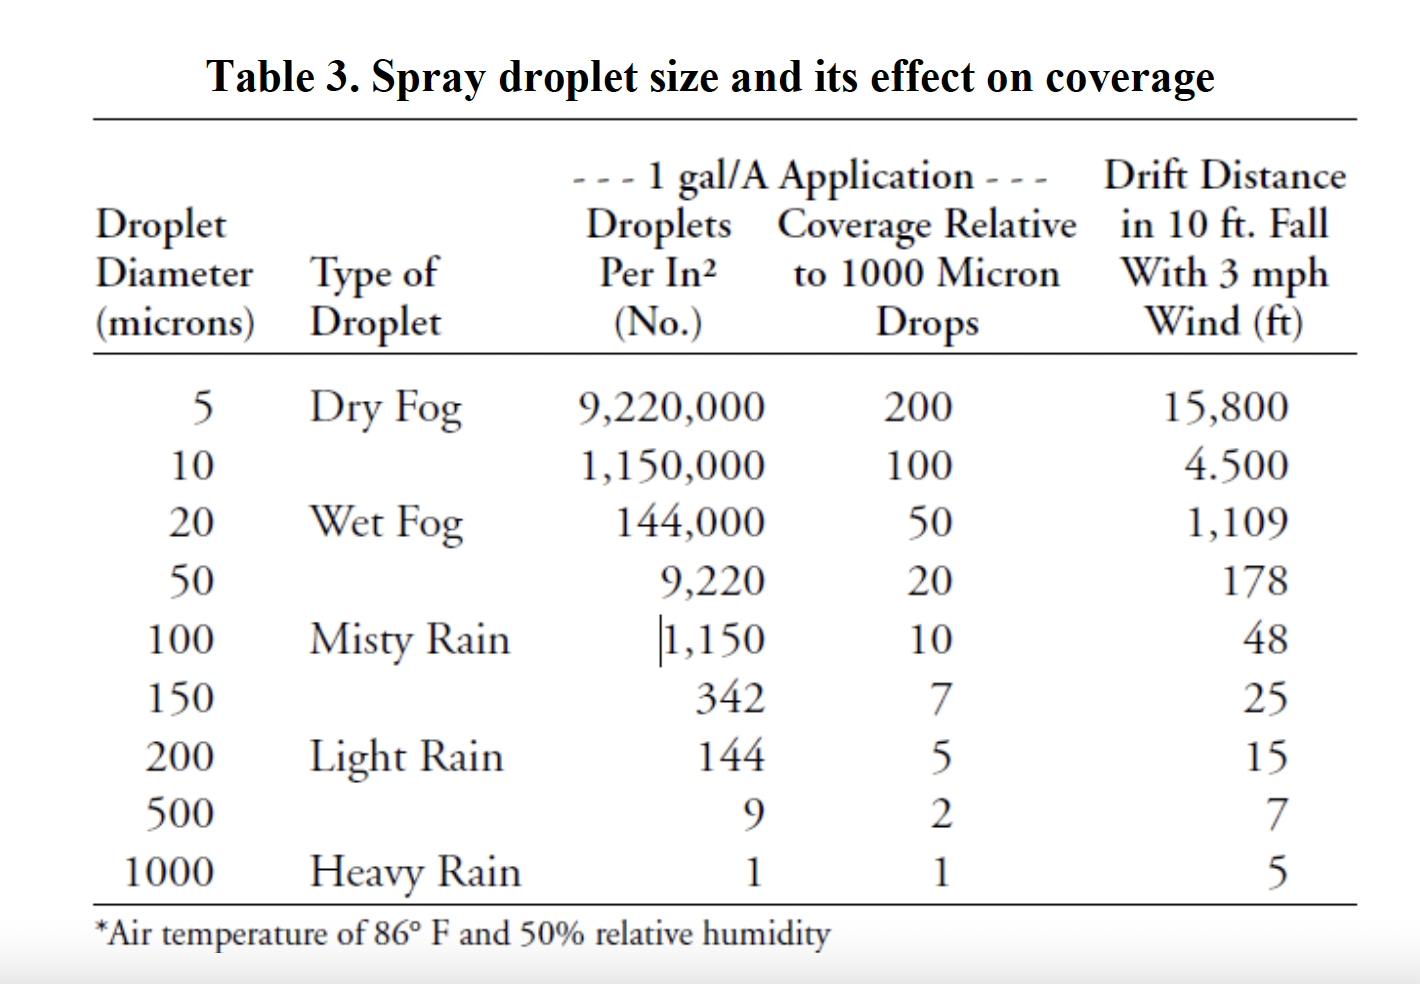 Table 3. Spray droplet size and its effect on coverage